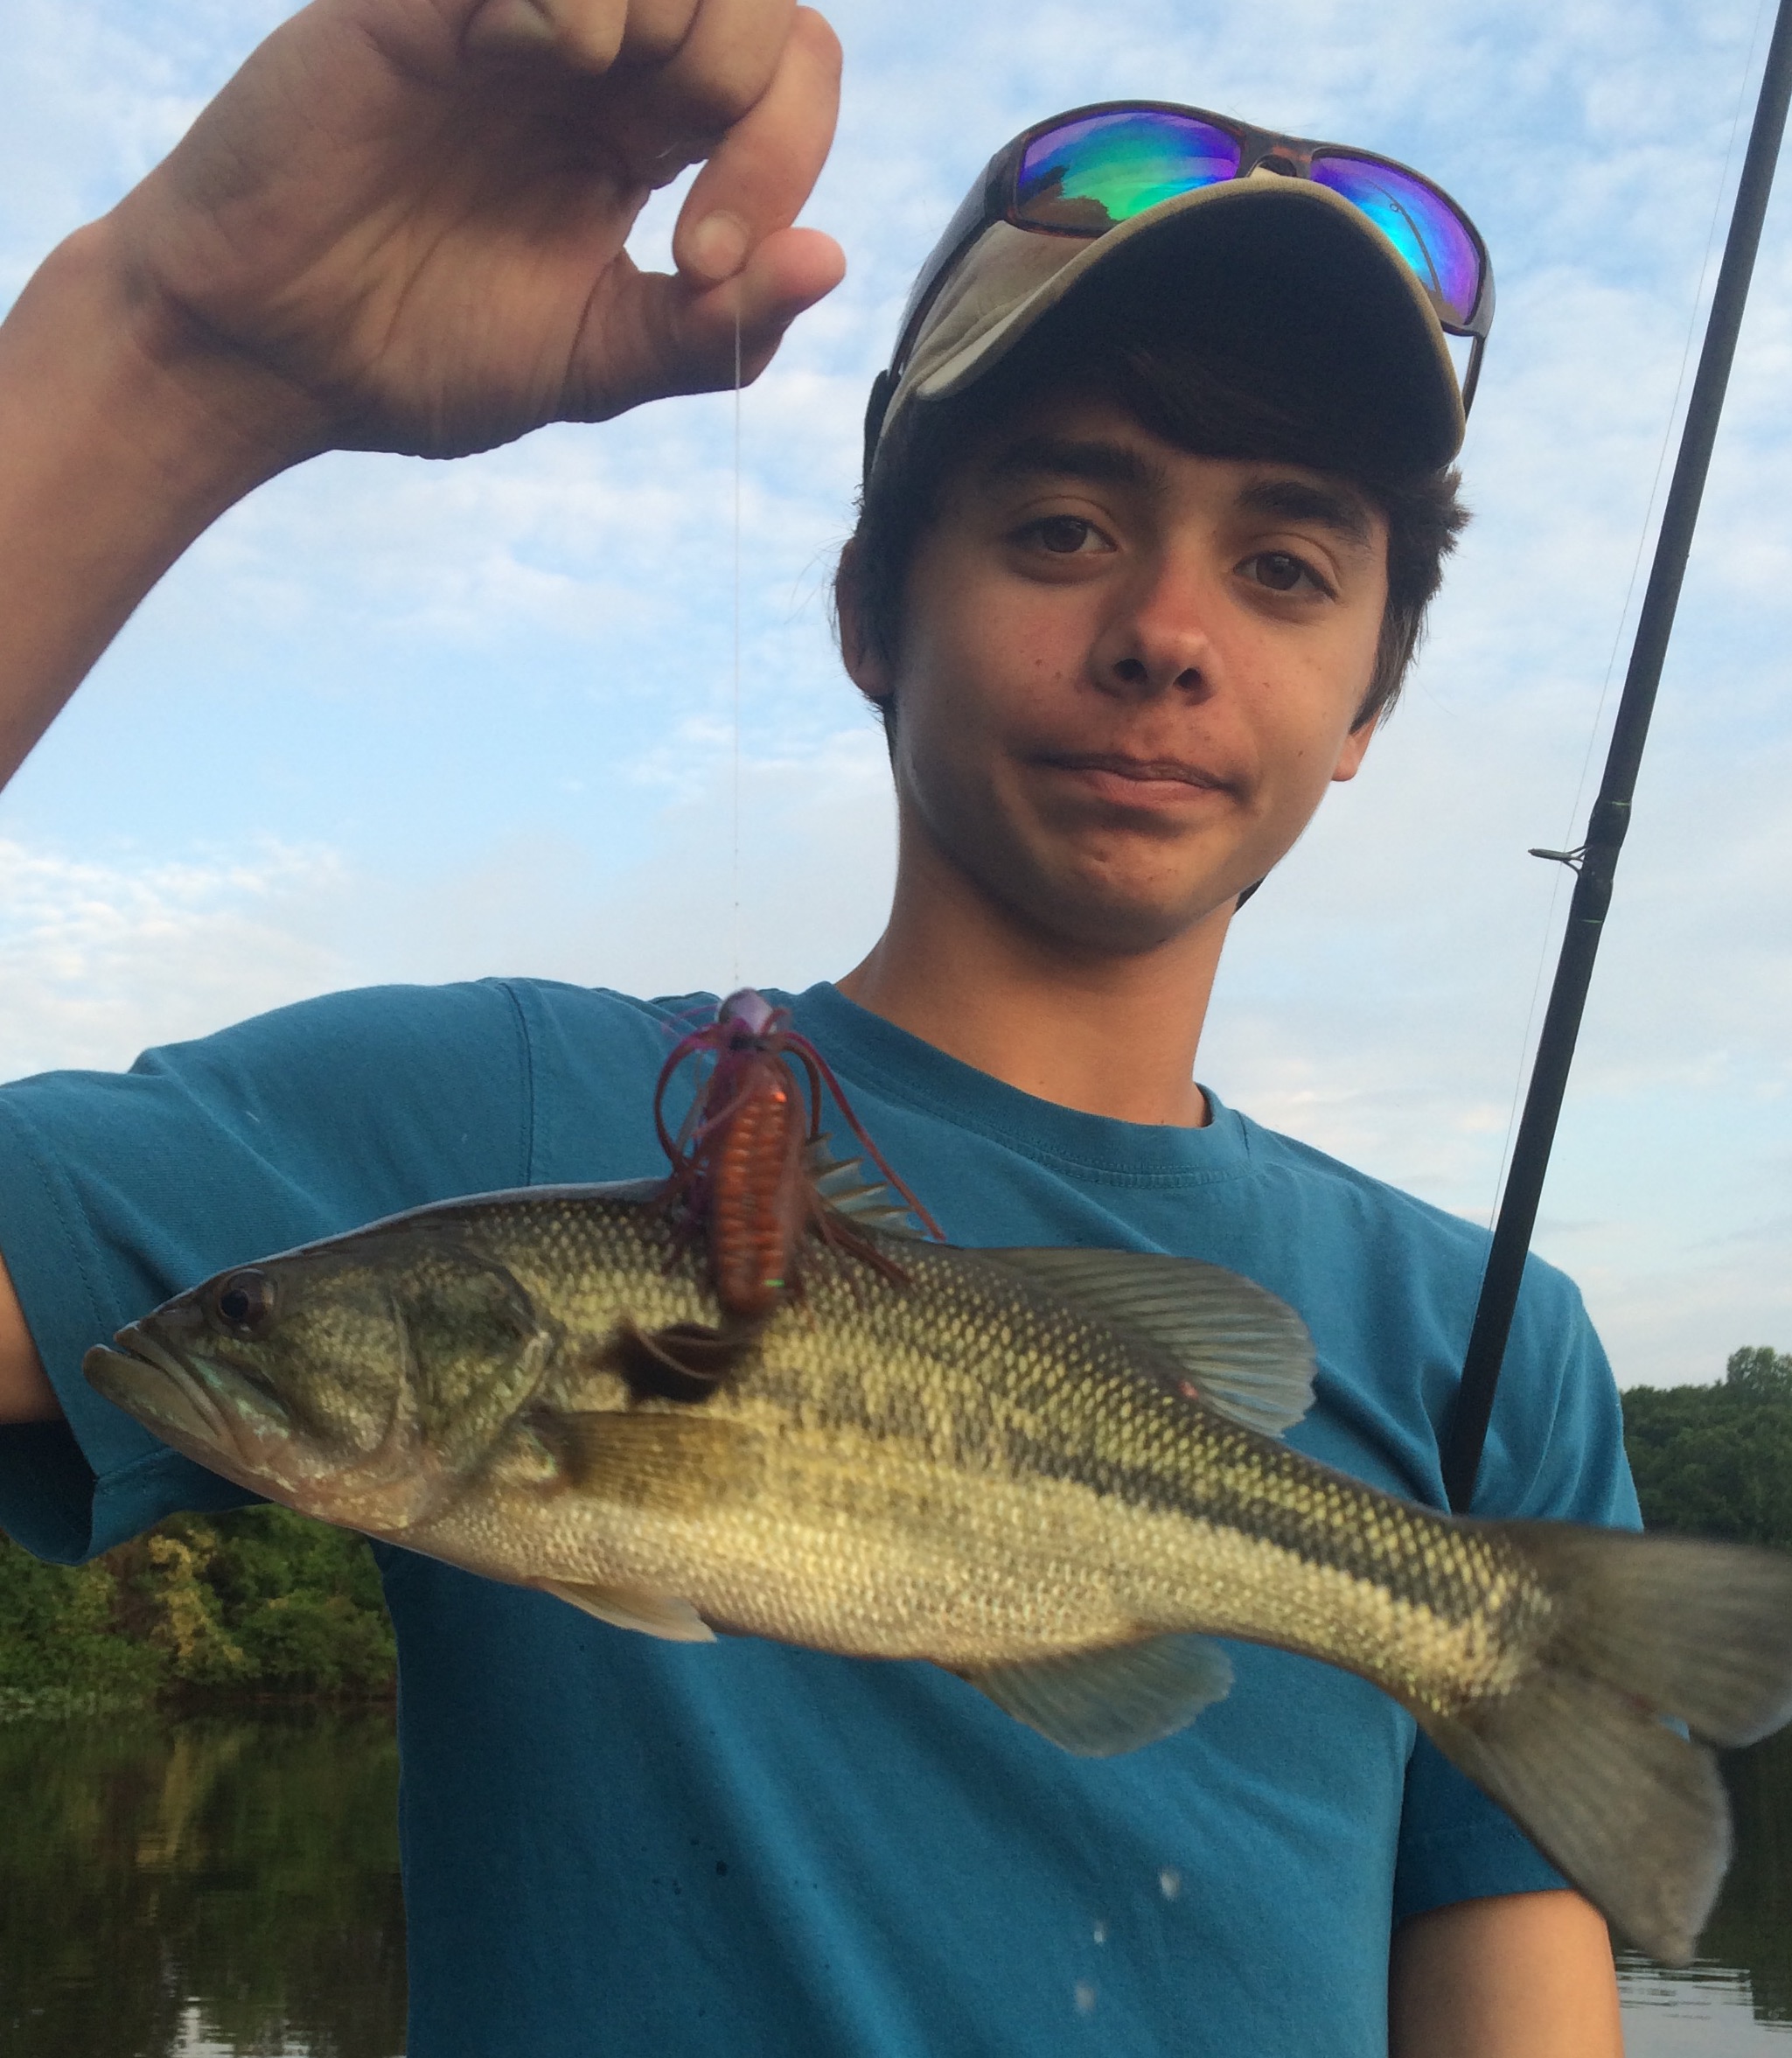 Have you ever caught a fish without hooking it in the mouth? - General Bass  Fishing Forum - Bass Fishing Forums